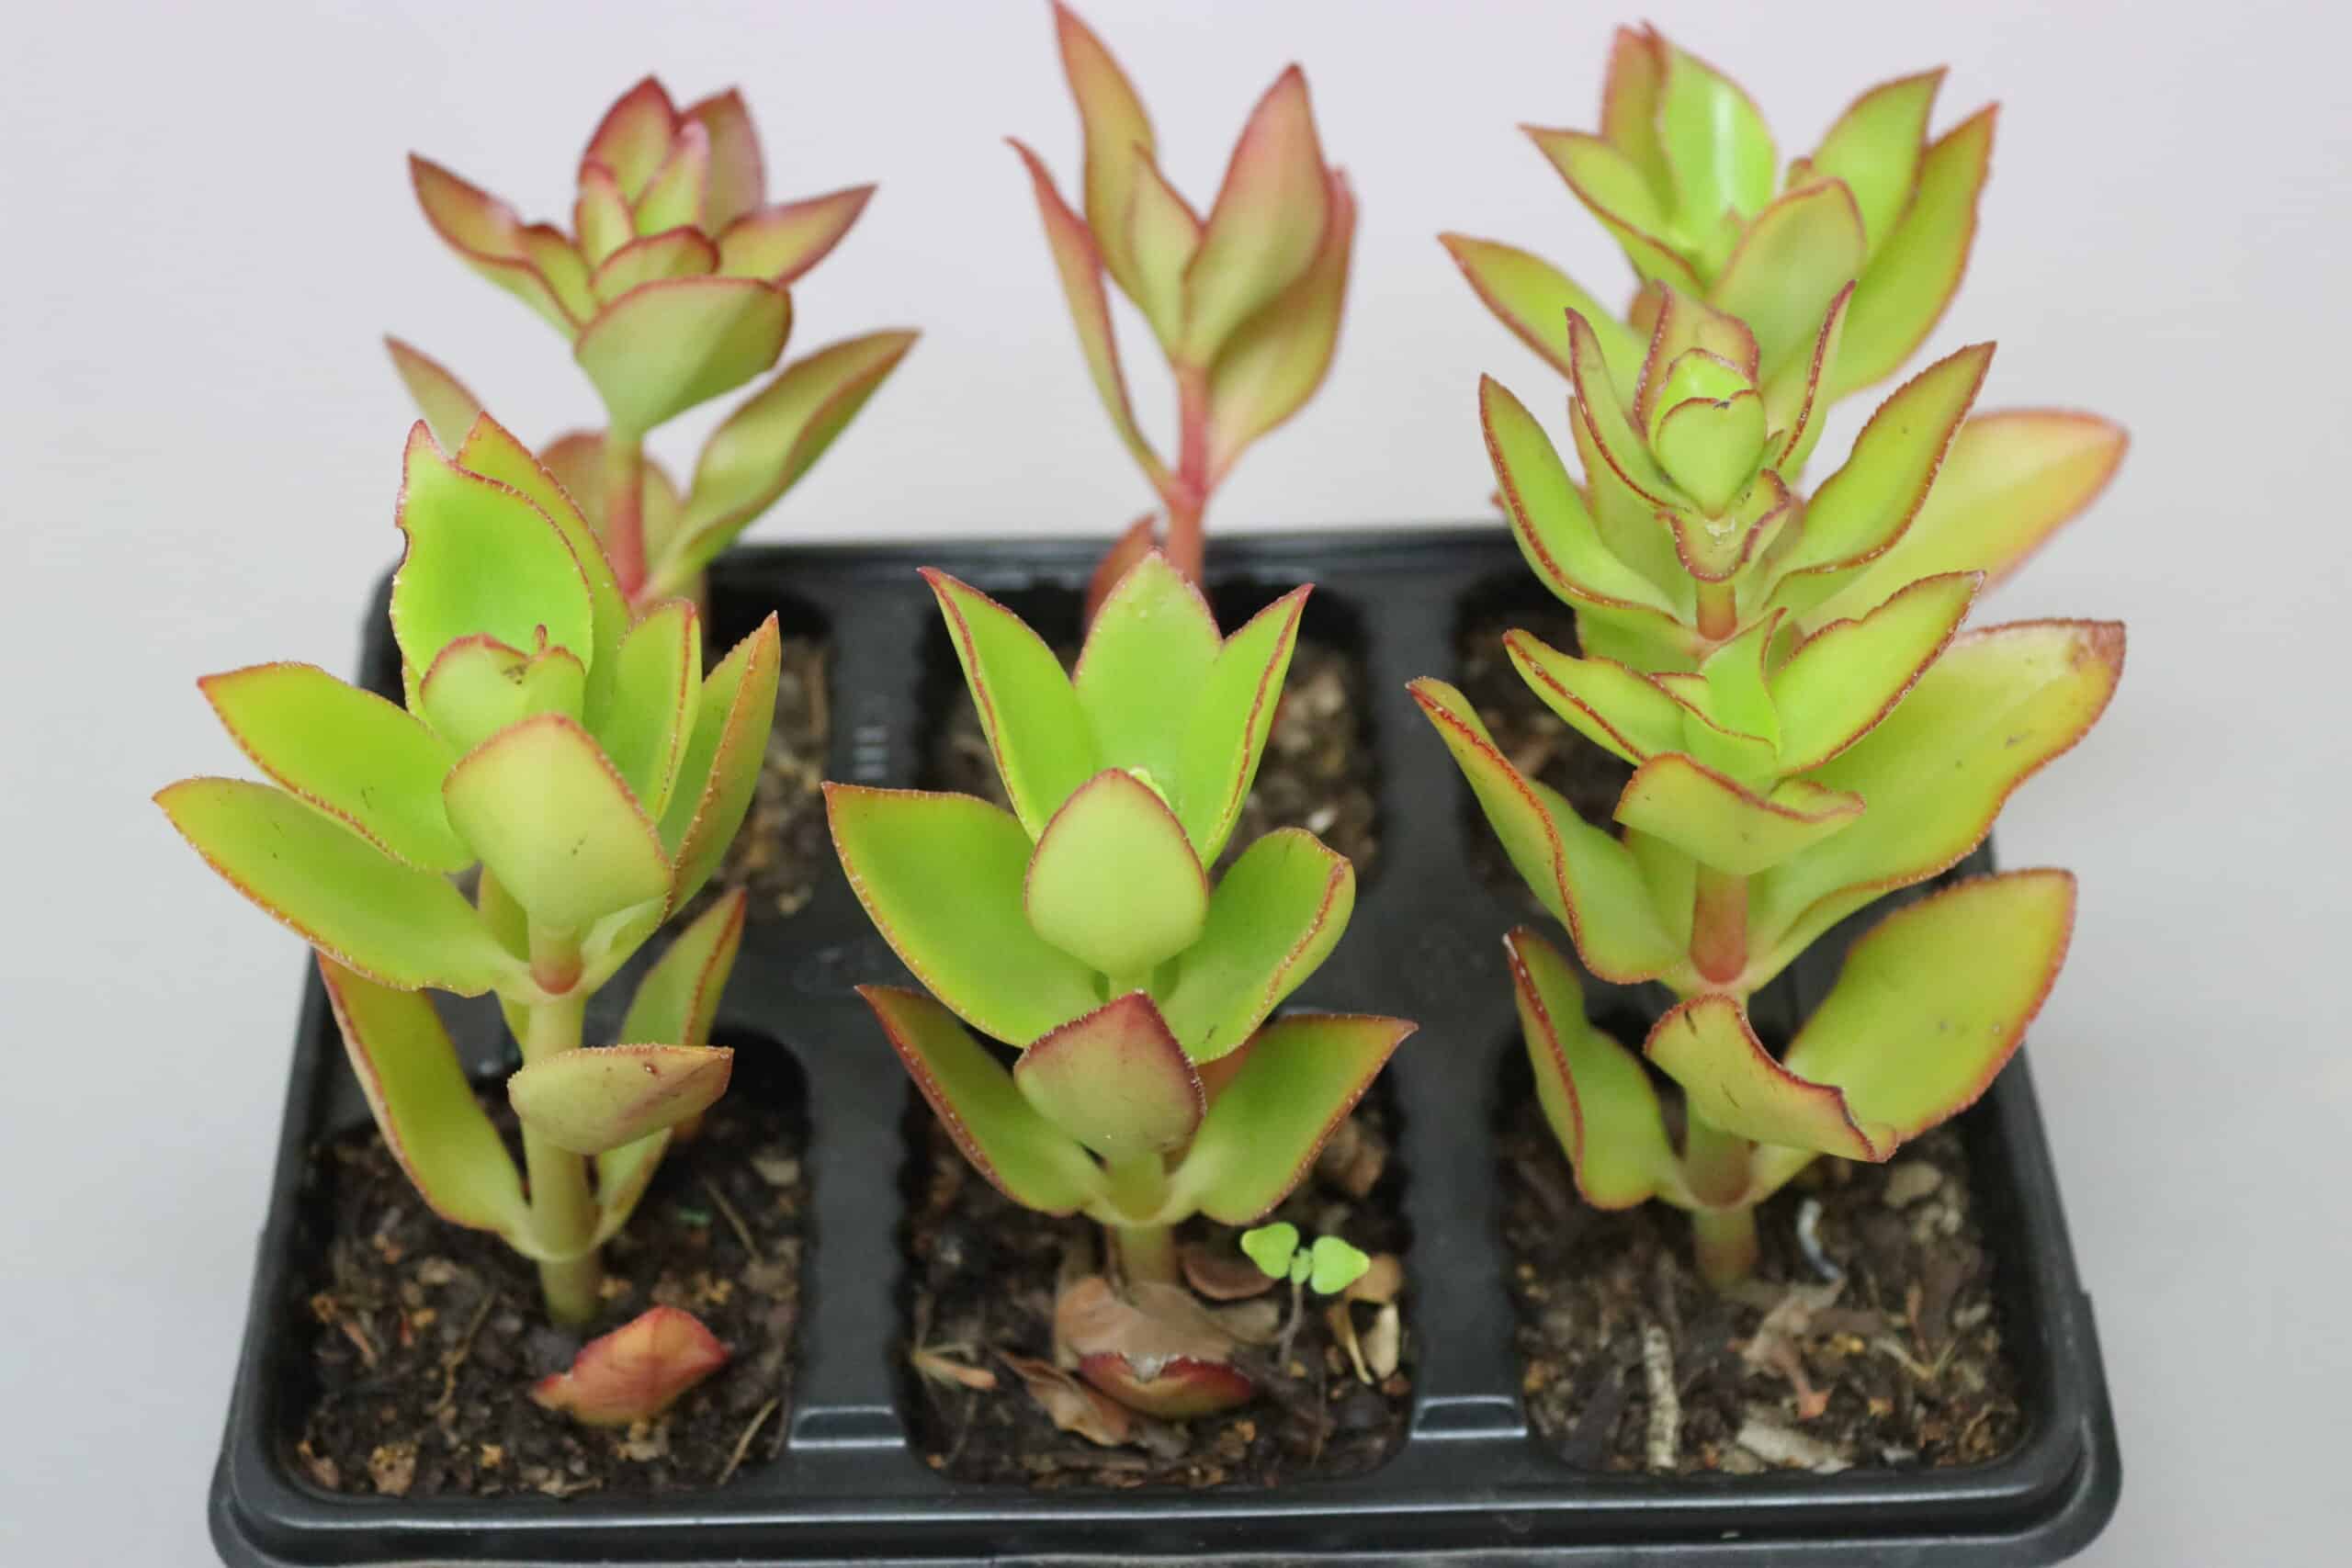 Six green and red succulent plants in a black seedling tray against a white background.